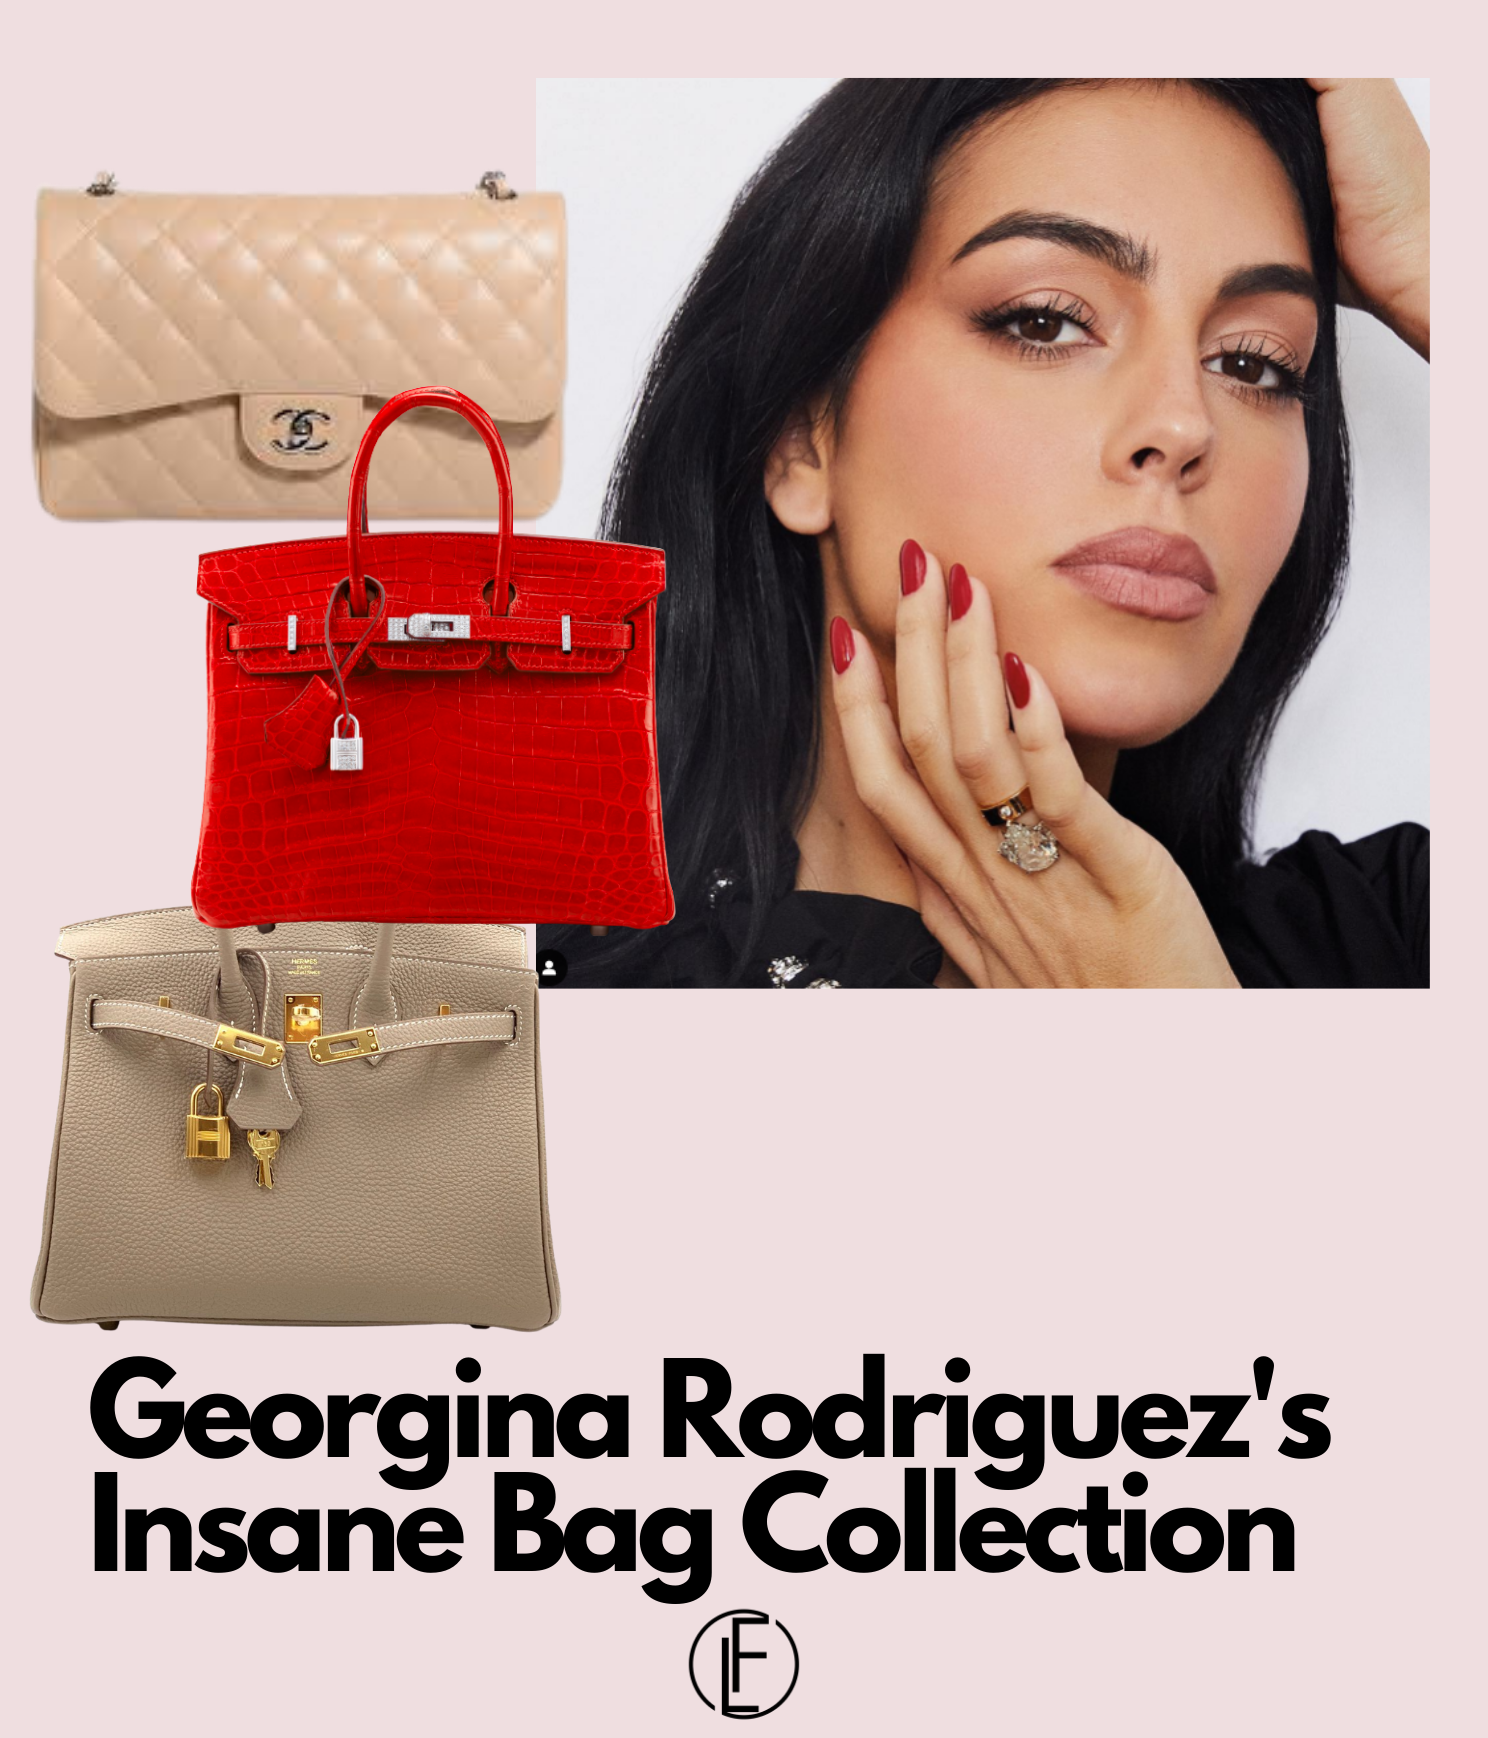 Georgina Rodriguez’s Luxury Handbag Collection. How Much Do Her Bags cost?